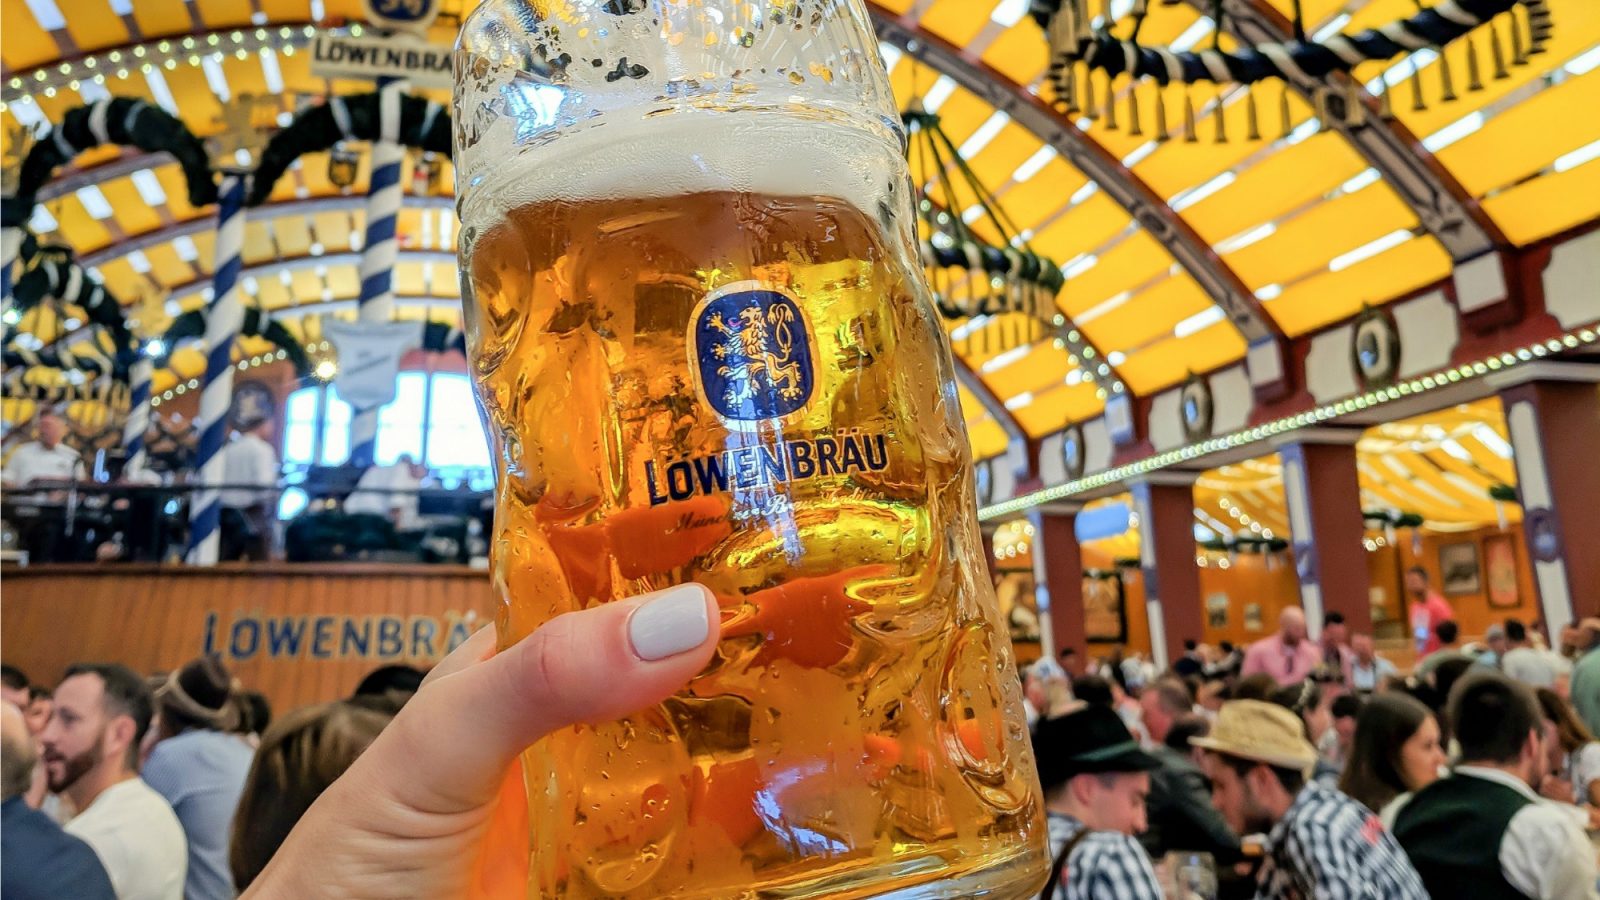 Oktoberfest party beer: What kind of beer to serve at your oktoberfest party | Lowenbrau mass at Oktoberfest in Munich, Germany #oktoberfest #munich #germany #beer #festival #mywanderlustylife